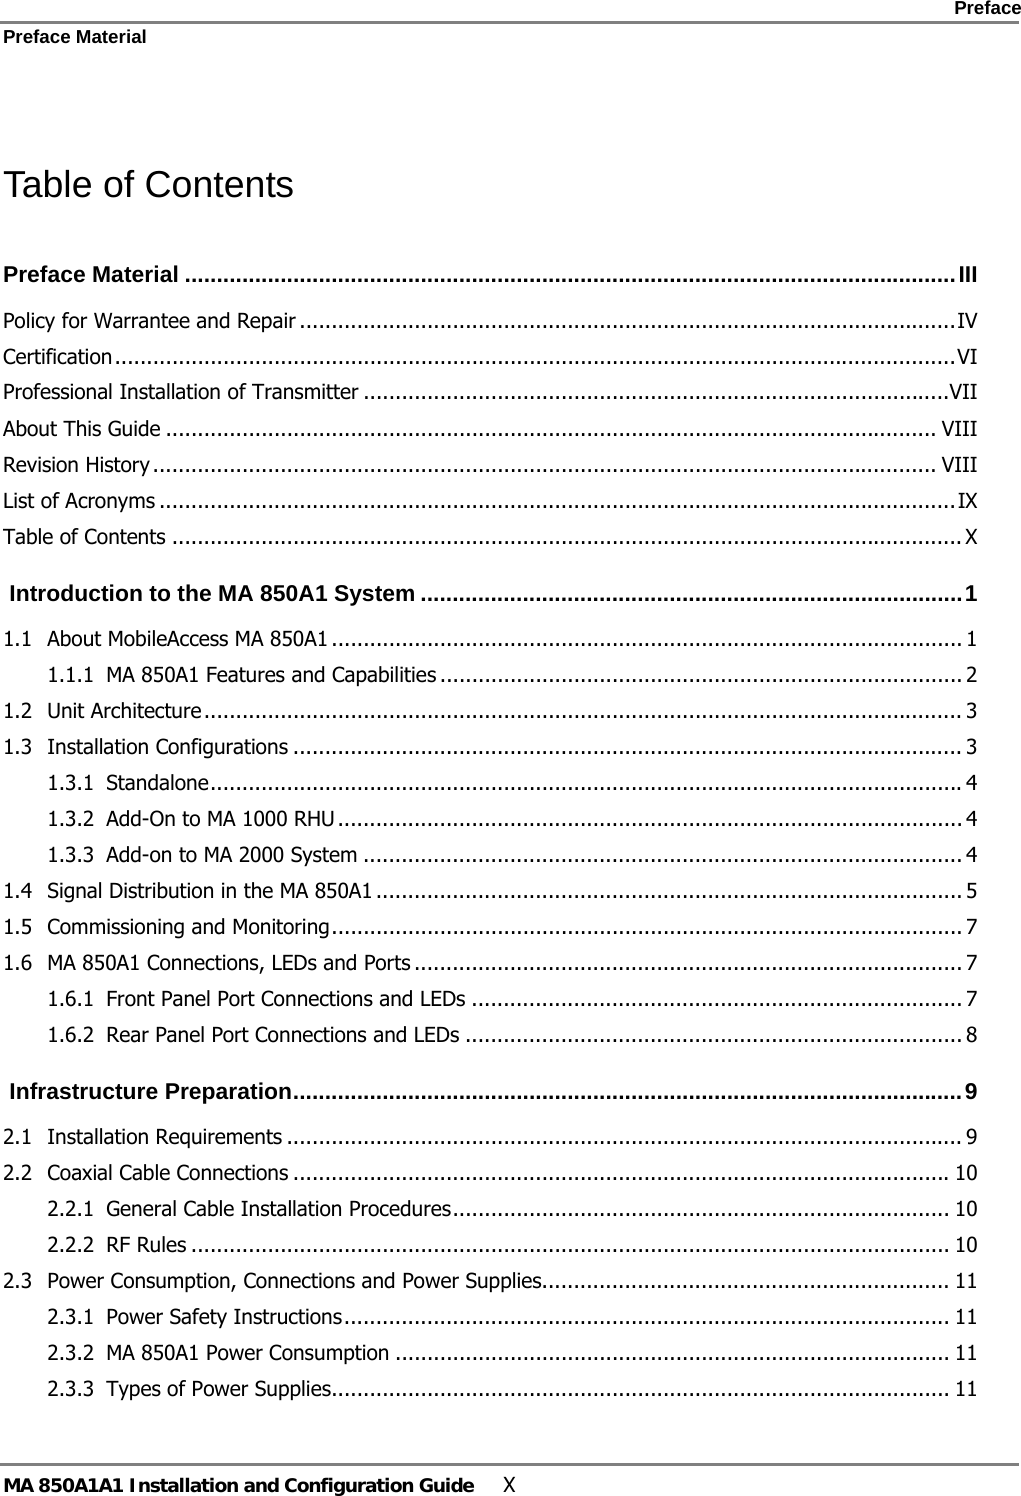    Preface Preface Material      MA 850A1A1 Installation and Configuration Guide  X  Table of Contents Preface Material .........................................................................................................................III Policy for Warrantee and Repair .......................................................................................................IV Certification....................................................................................................................................VI Professional Installation of Transmitter ............................................................................................VII About This Guide ......................................................................................................................... VIII Revision History ........................................................................................................................... VIII List of Acronyms .............................................................................................................................IX Table of Contents ............................................................................................................................ X  Introduction to the MA 850A1 System .....................................................................................1 1.1 About MobileAccess MA 850A1 ................................................................................................... 1 1.1.1 MA 850A1 Features and Capabilities .................................................................................. 2 1.2 Unit Architecture....................................................................................................................... 3 1.3 Installation Configurations ......................................................................................................... 3 1.3.1 Standalone...................................................................................................................... 4 1.3.2 Add-On to MA 1000 RHU .................................................................................................. 4 1.3.3 Add-on to MA 2000 System .............................................................................................. 4 1.4 Signal Distribution in the MA 850A1 ............................................................................................ 5 1.5 Commissioning and Monitoring................................................................................................... 7 1.6 MA 850A1 Connections, LEDs and Ports ...................................................................................... 7 1.6.1 Front Panel Port Connections and LEDs ............................................................................. 7 1.6.2 Rear Panel Port Connections and LEDs .............................................................................. 8  Infrastructure Preparation.........................................................................................................9 2.1 Installation Requirements .......................................................................................................... 9 2.2 Coaxial Cable Connections .......................................................................................................10 2.2.1 General Cable Installation Procedures.............................................................................. 10 2.2.2 RF Rules ....................................................................................................................... 10 2.3 Power Consumption, Connections and Power Supplies................................................................ 11 2.3.1 Power Safety Instructions............................................................................................... 11 2.3.2 MA 850A1 Power Consumption ....................................................................................... 11 2.3.3 Types of Power Supplies................................................................................................. 11 